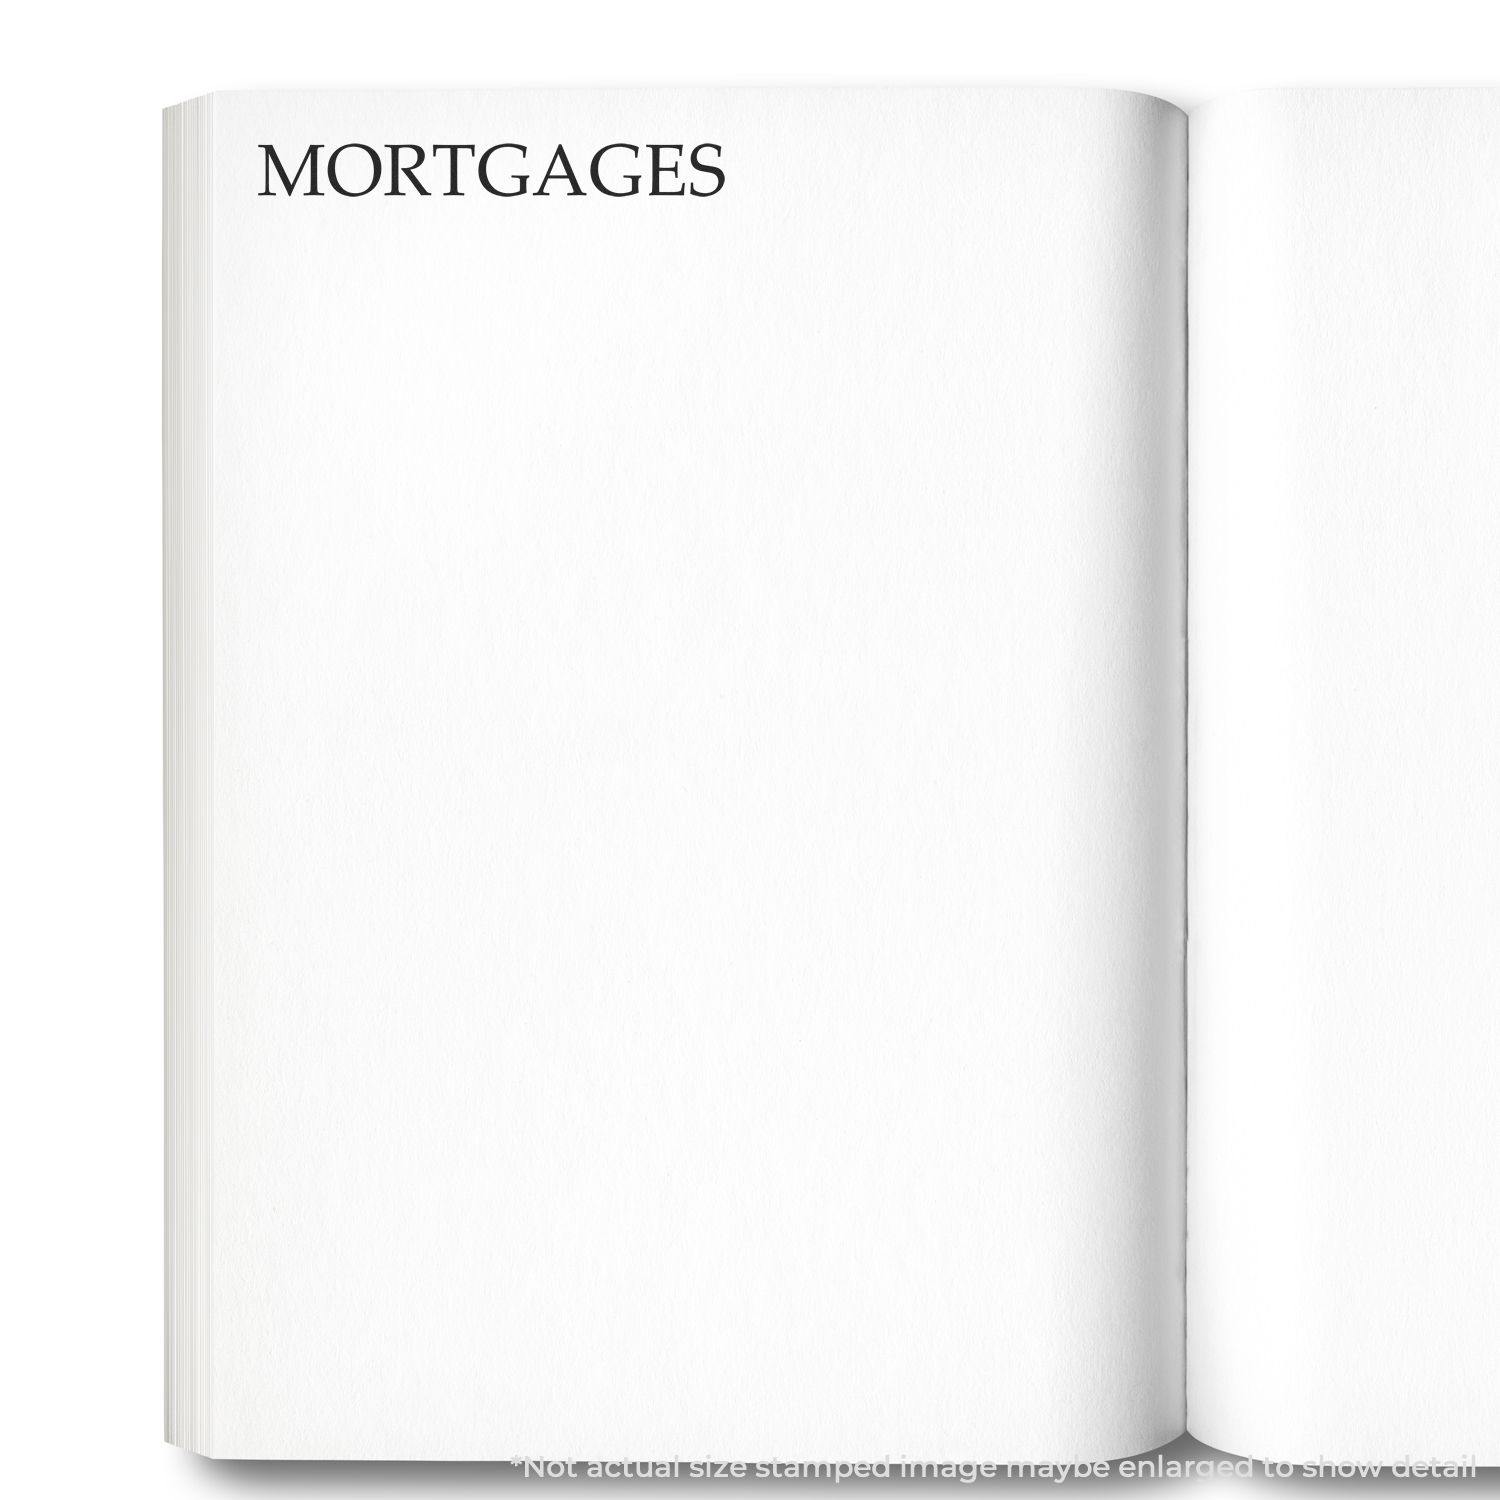 In Use Large Pre Inked Mortgages Stamp Image